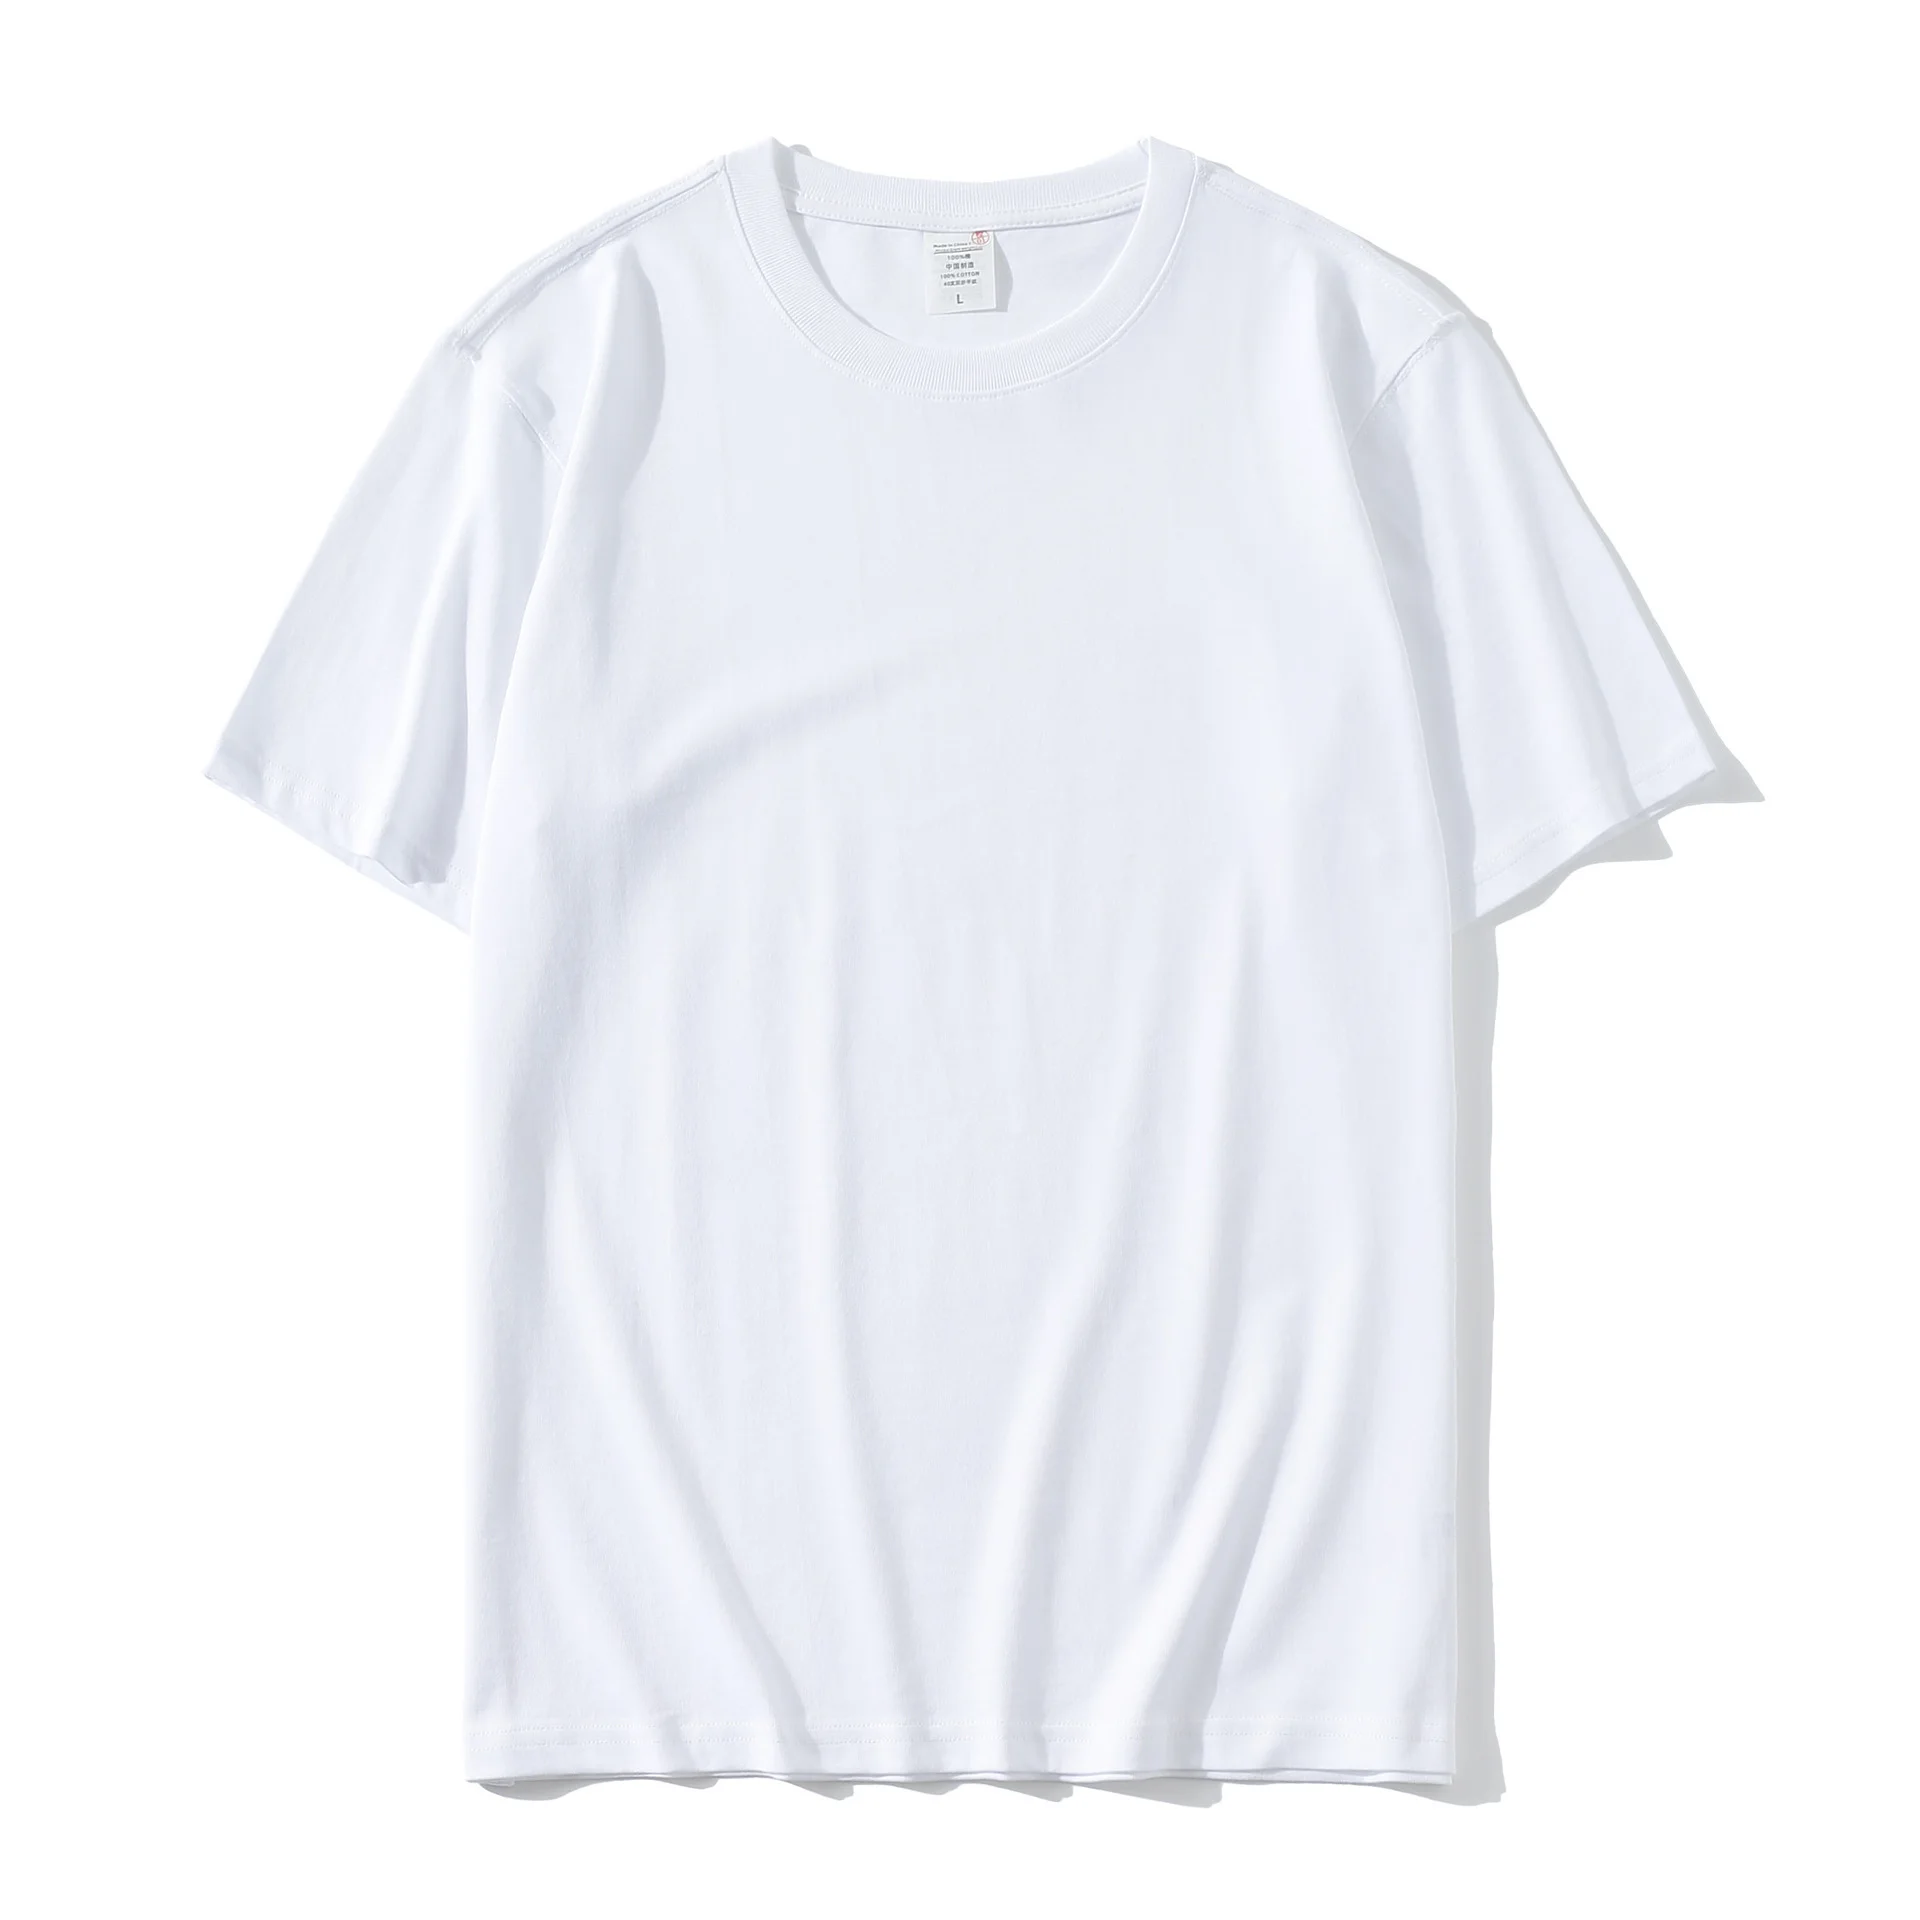 Wholesale Blank T shirts for Printing in Kassel